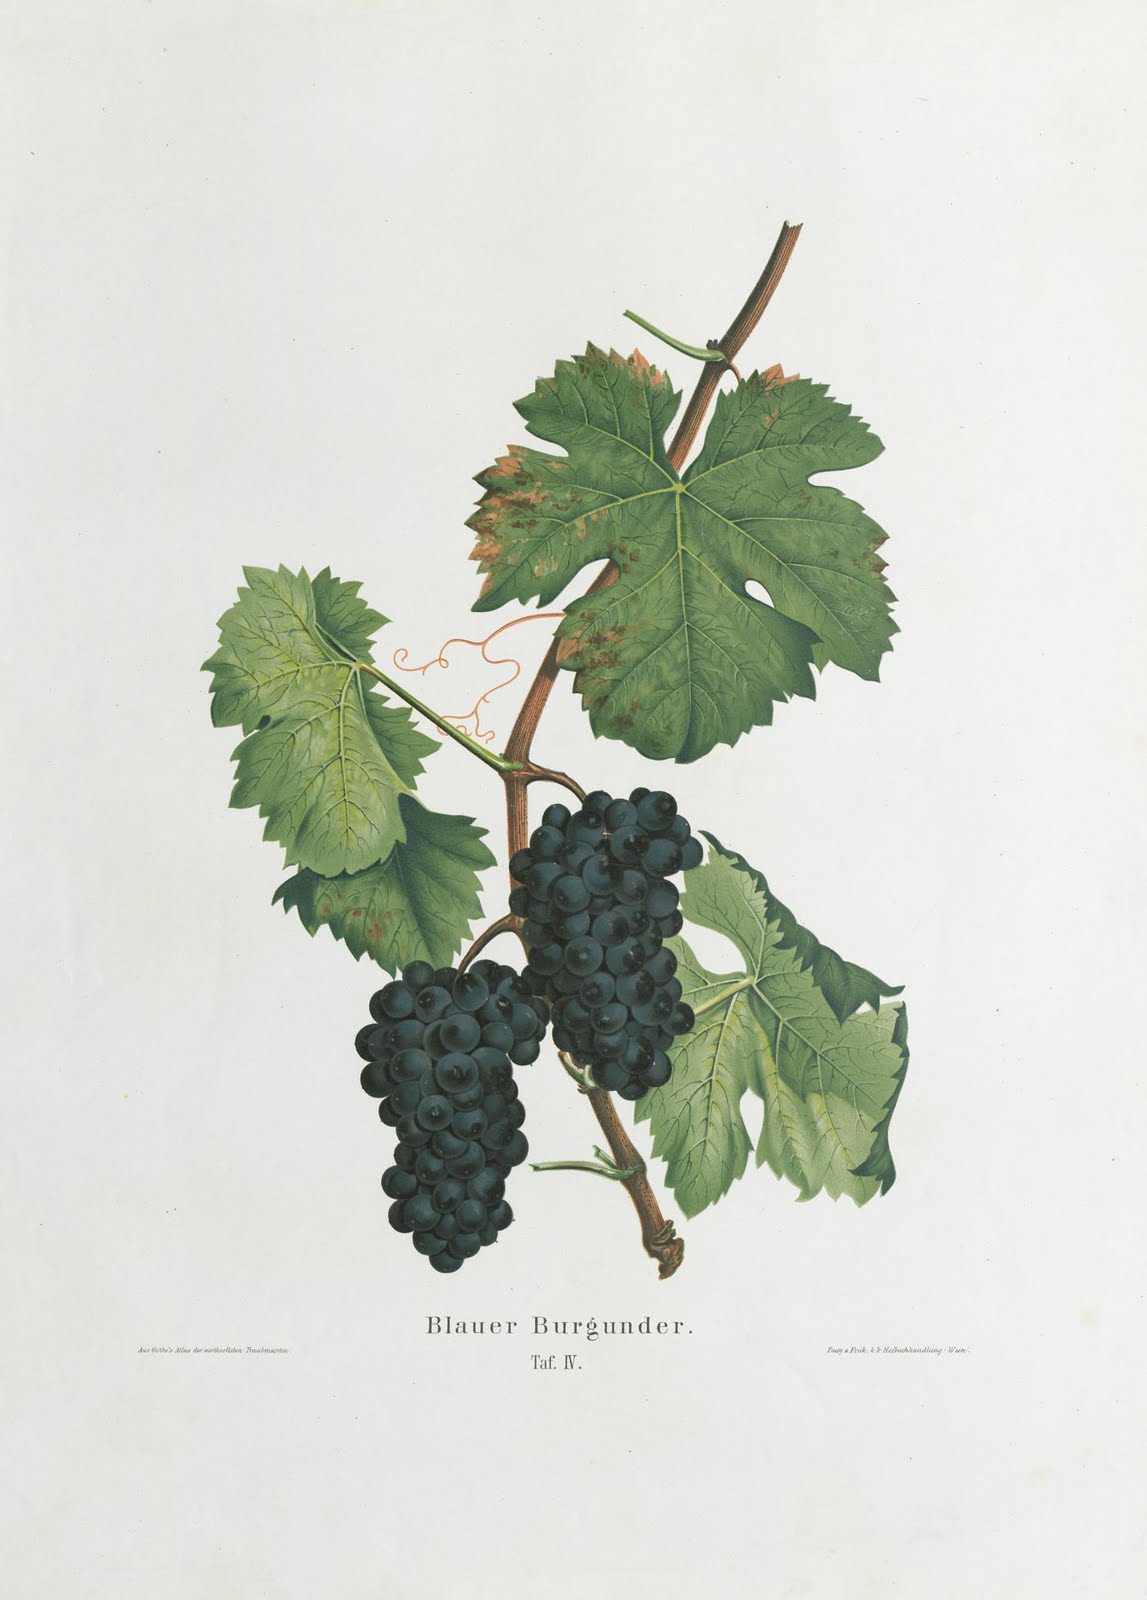 book illustration of a bunch of grapes